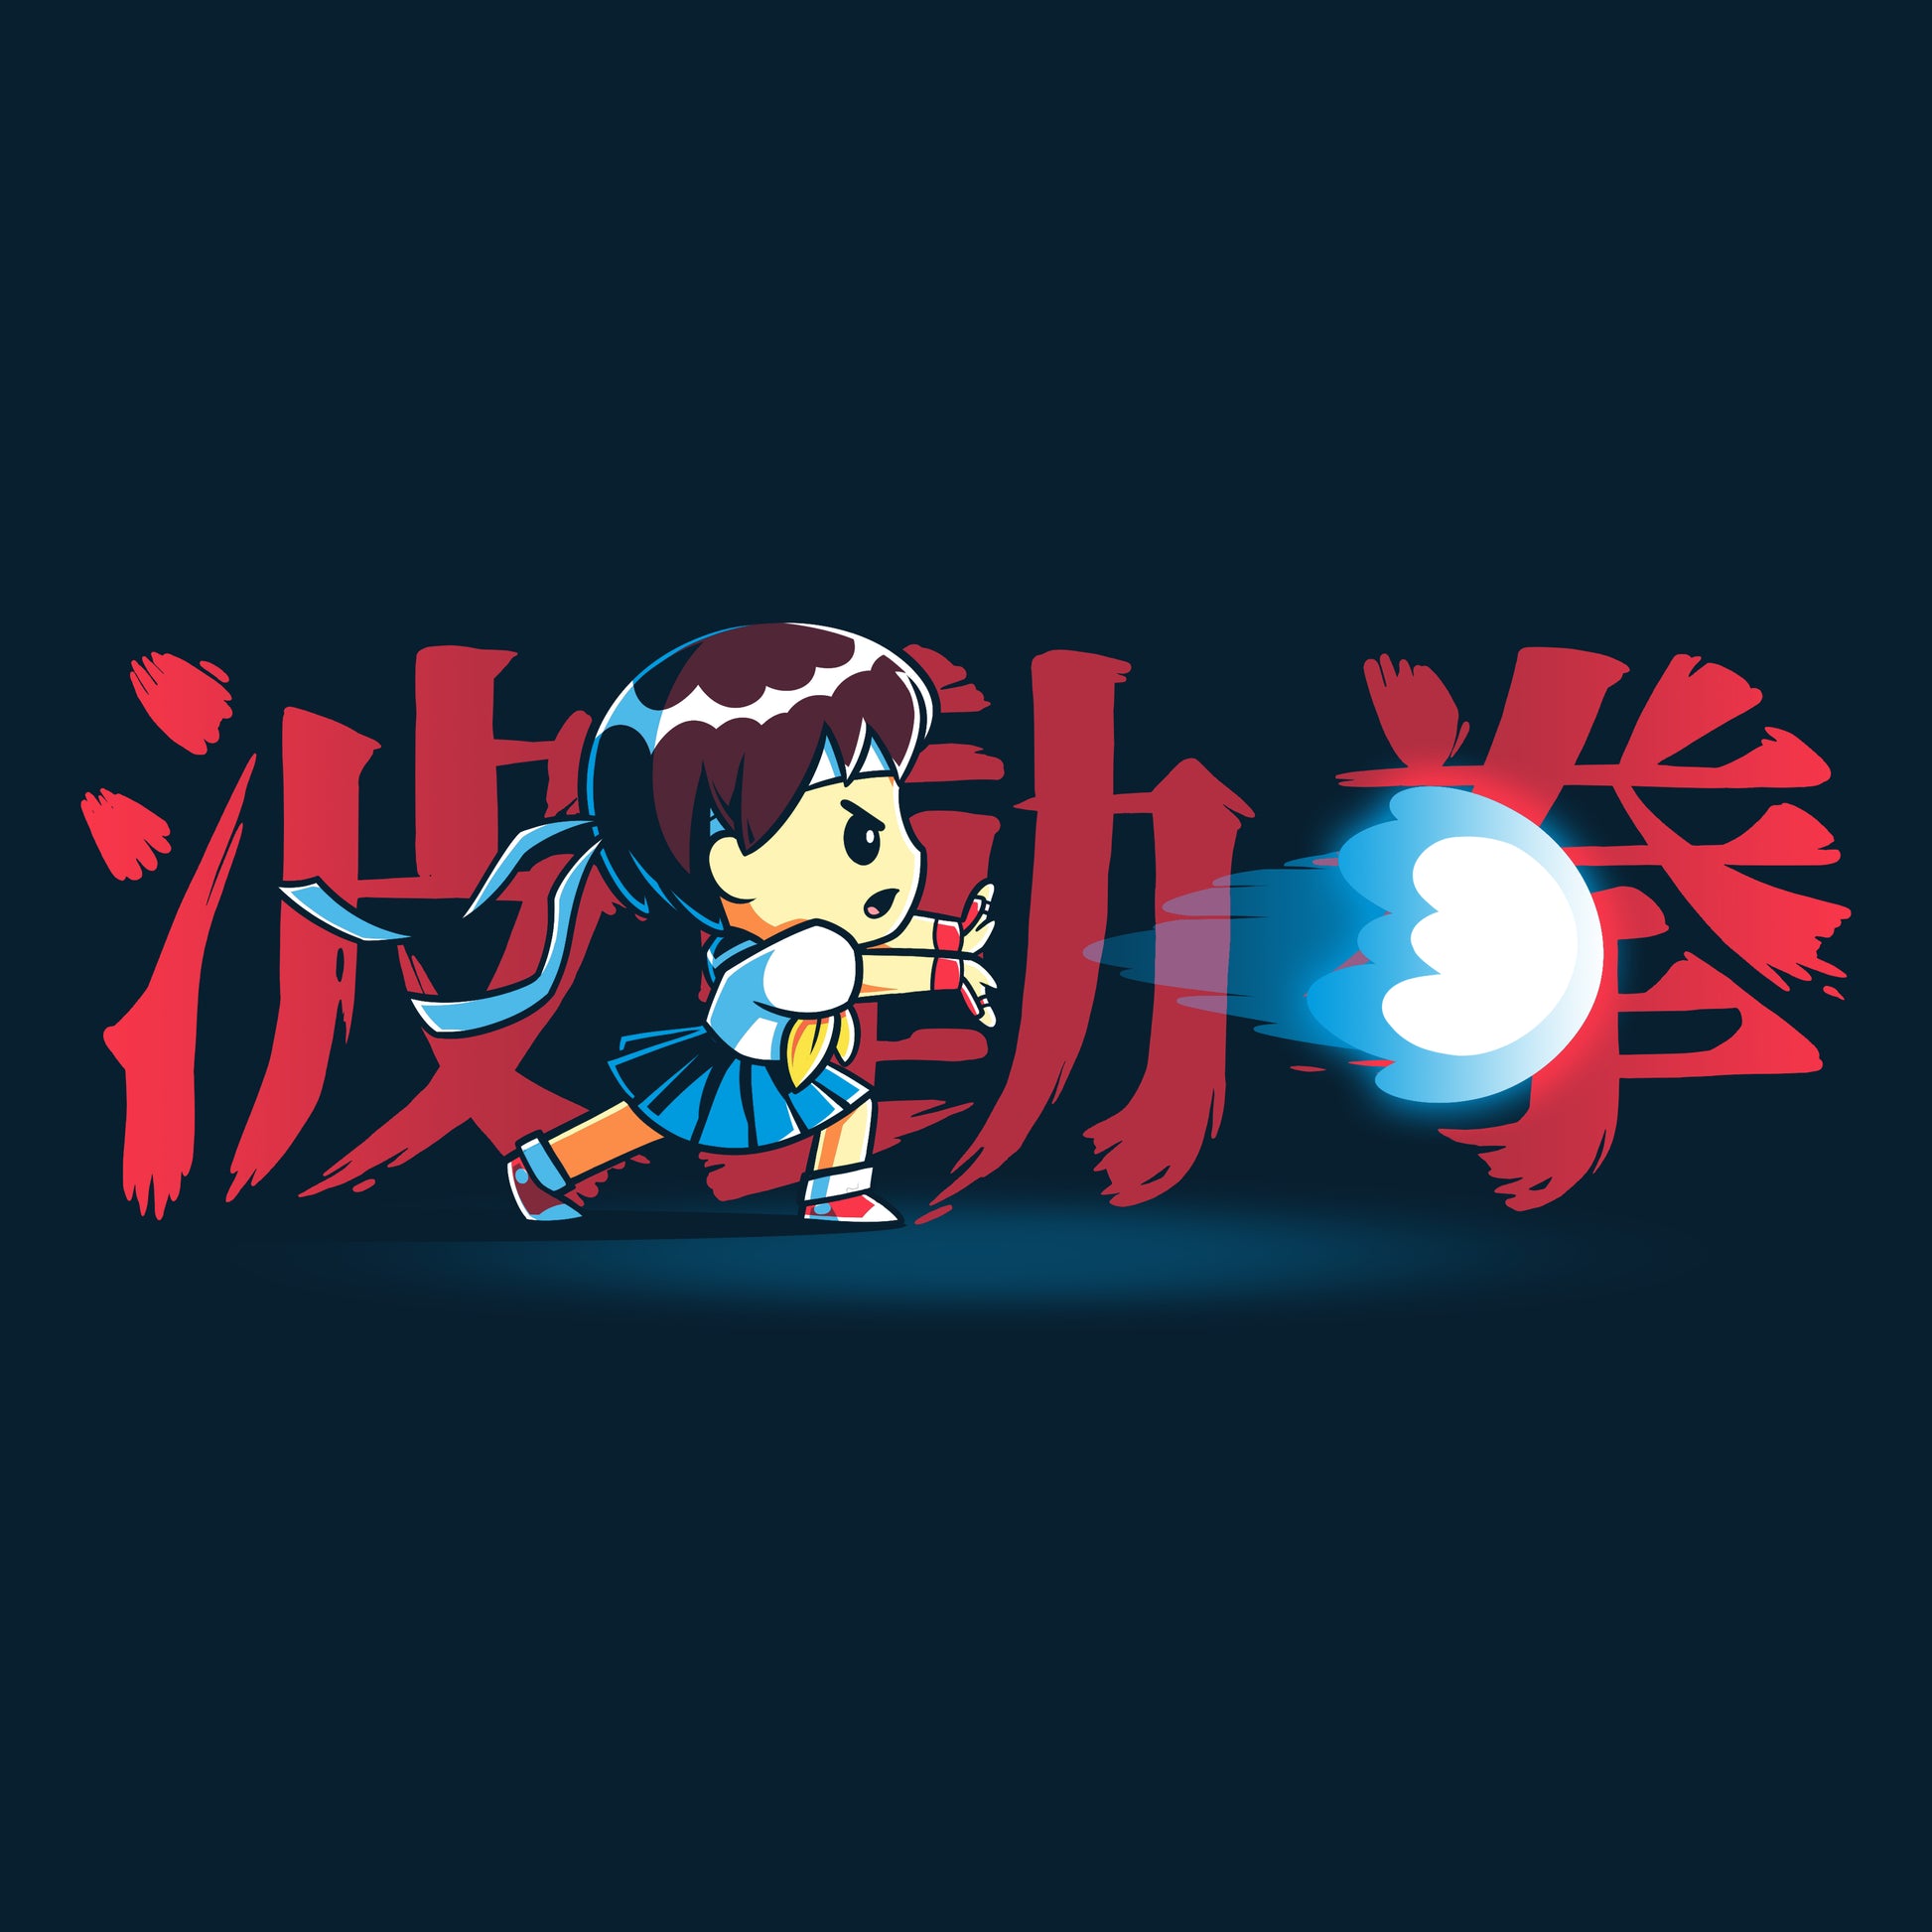 Sakura, a Street Fighter fan, is holding Sakura's Hadouken from the Street Fighter brand, with a Chinese character on it while wearing her favorite T-shirt.